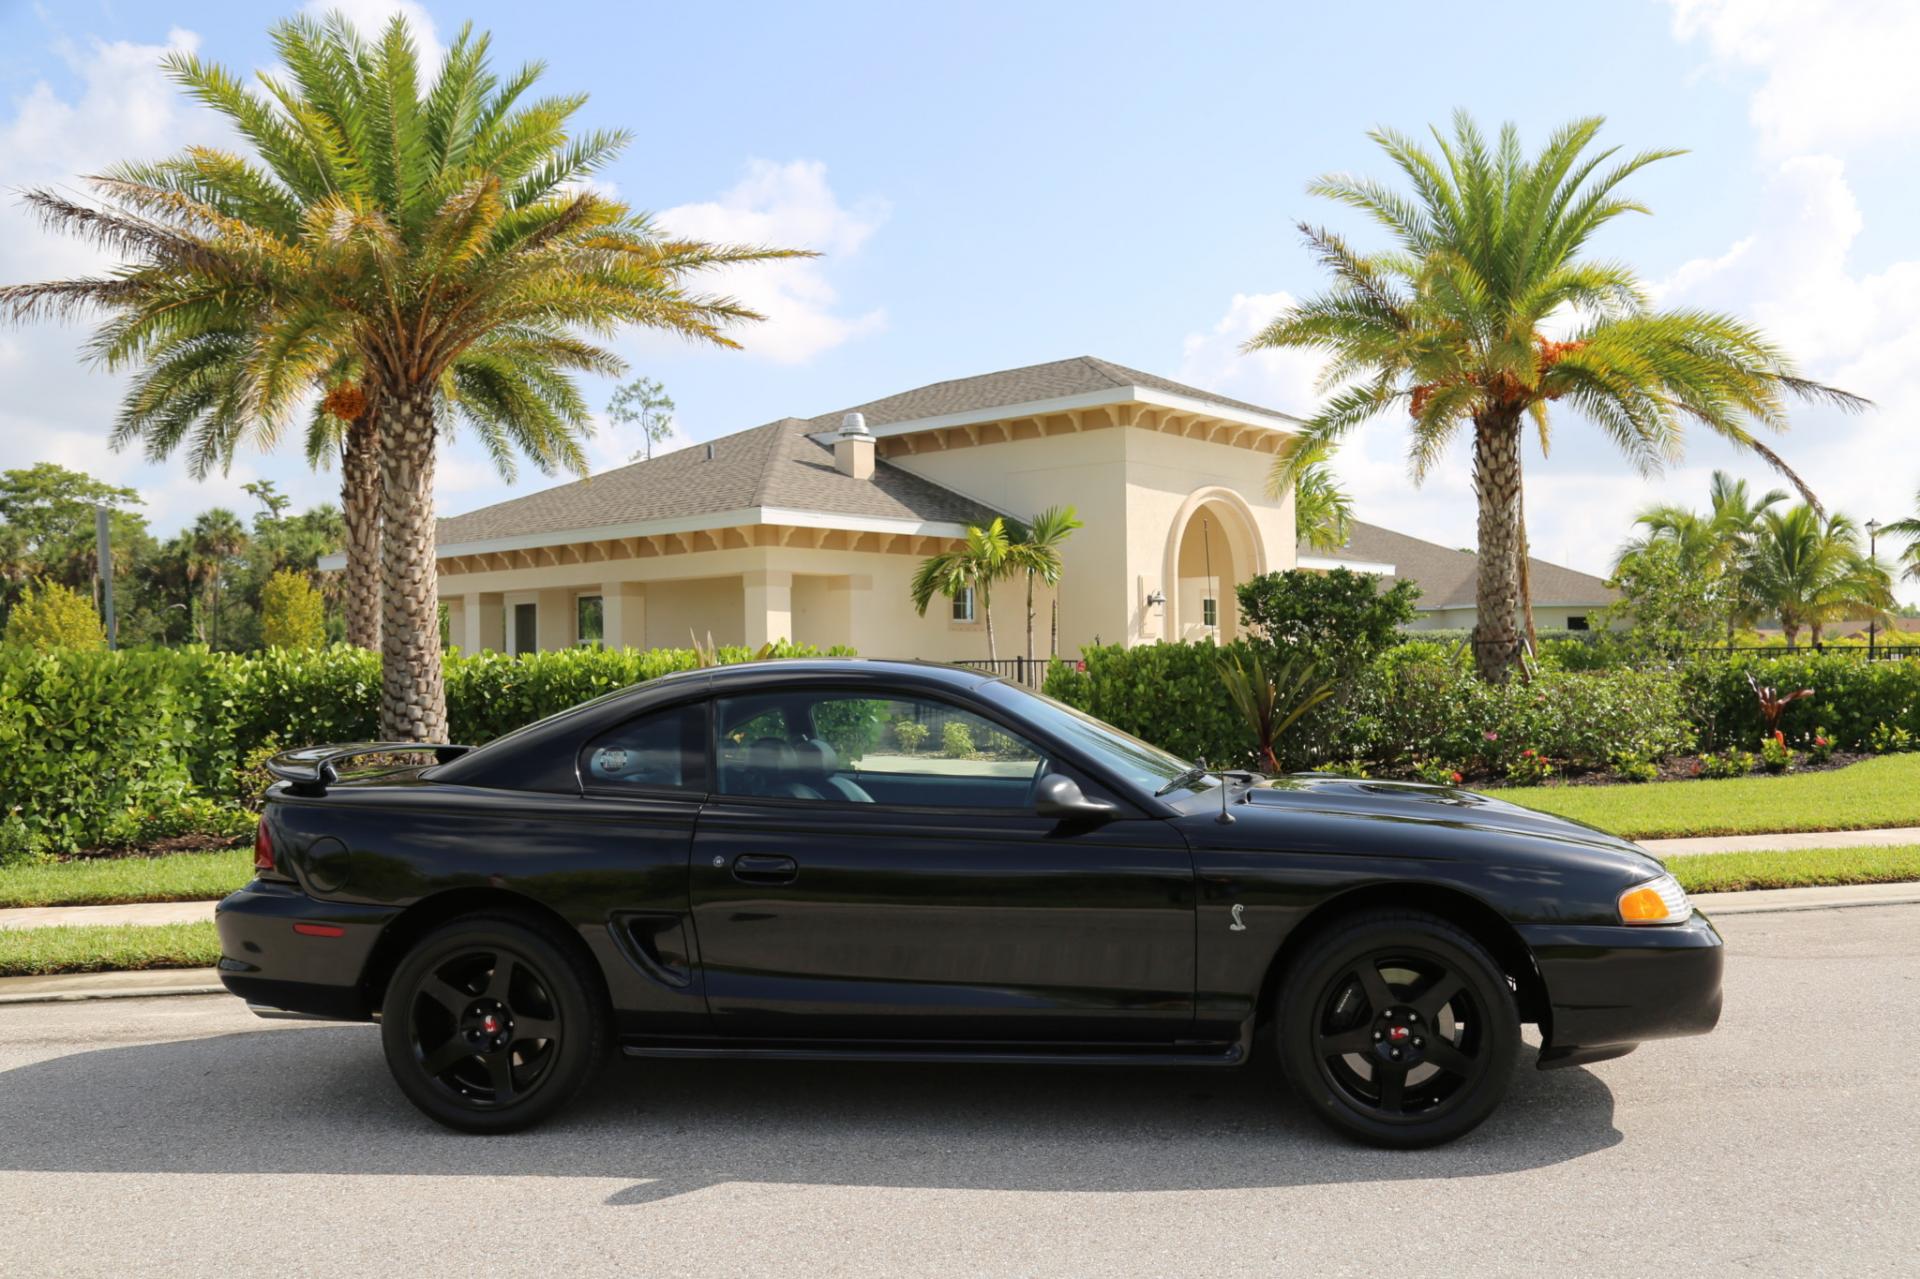 Used 1996 Mustang Cobra SVT Cobra for sale Sold at Muscle Cars for Sale Inc. in Fort Myers FL 33912 6